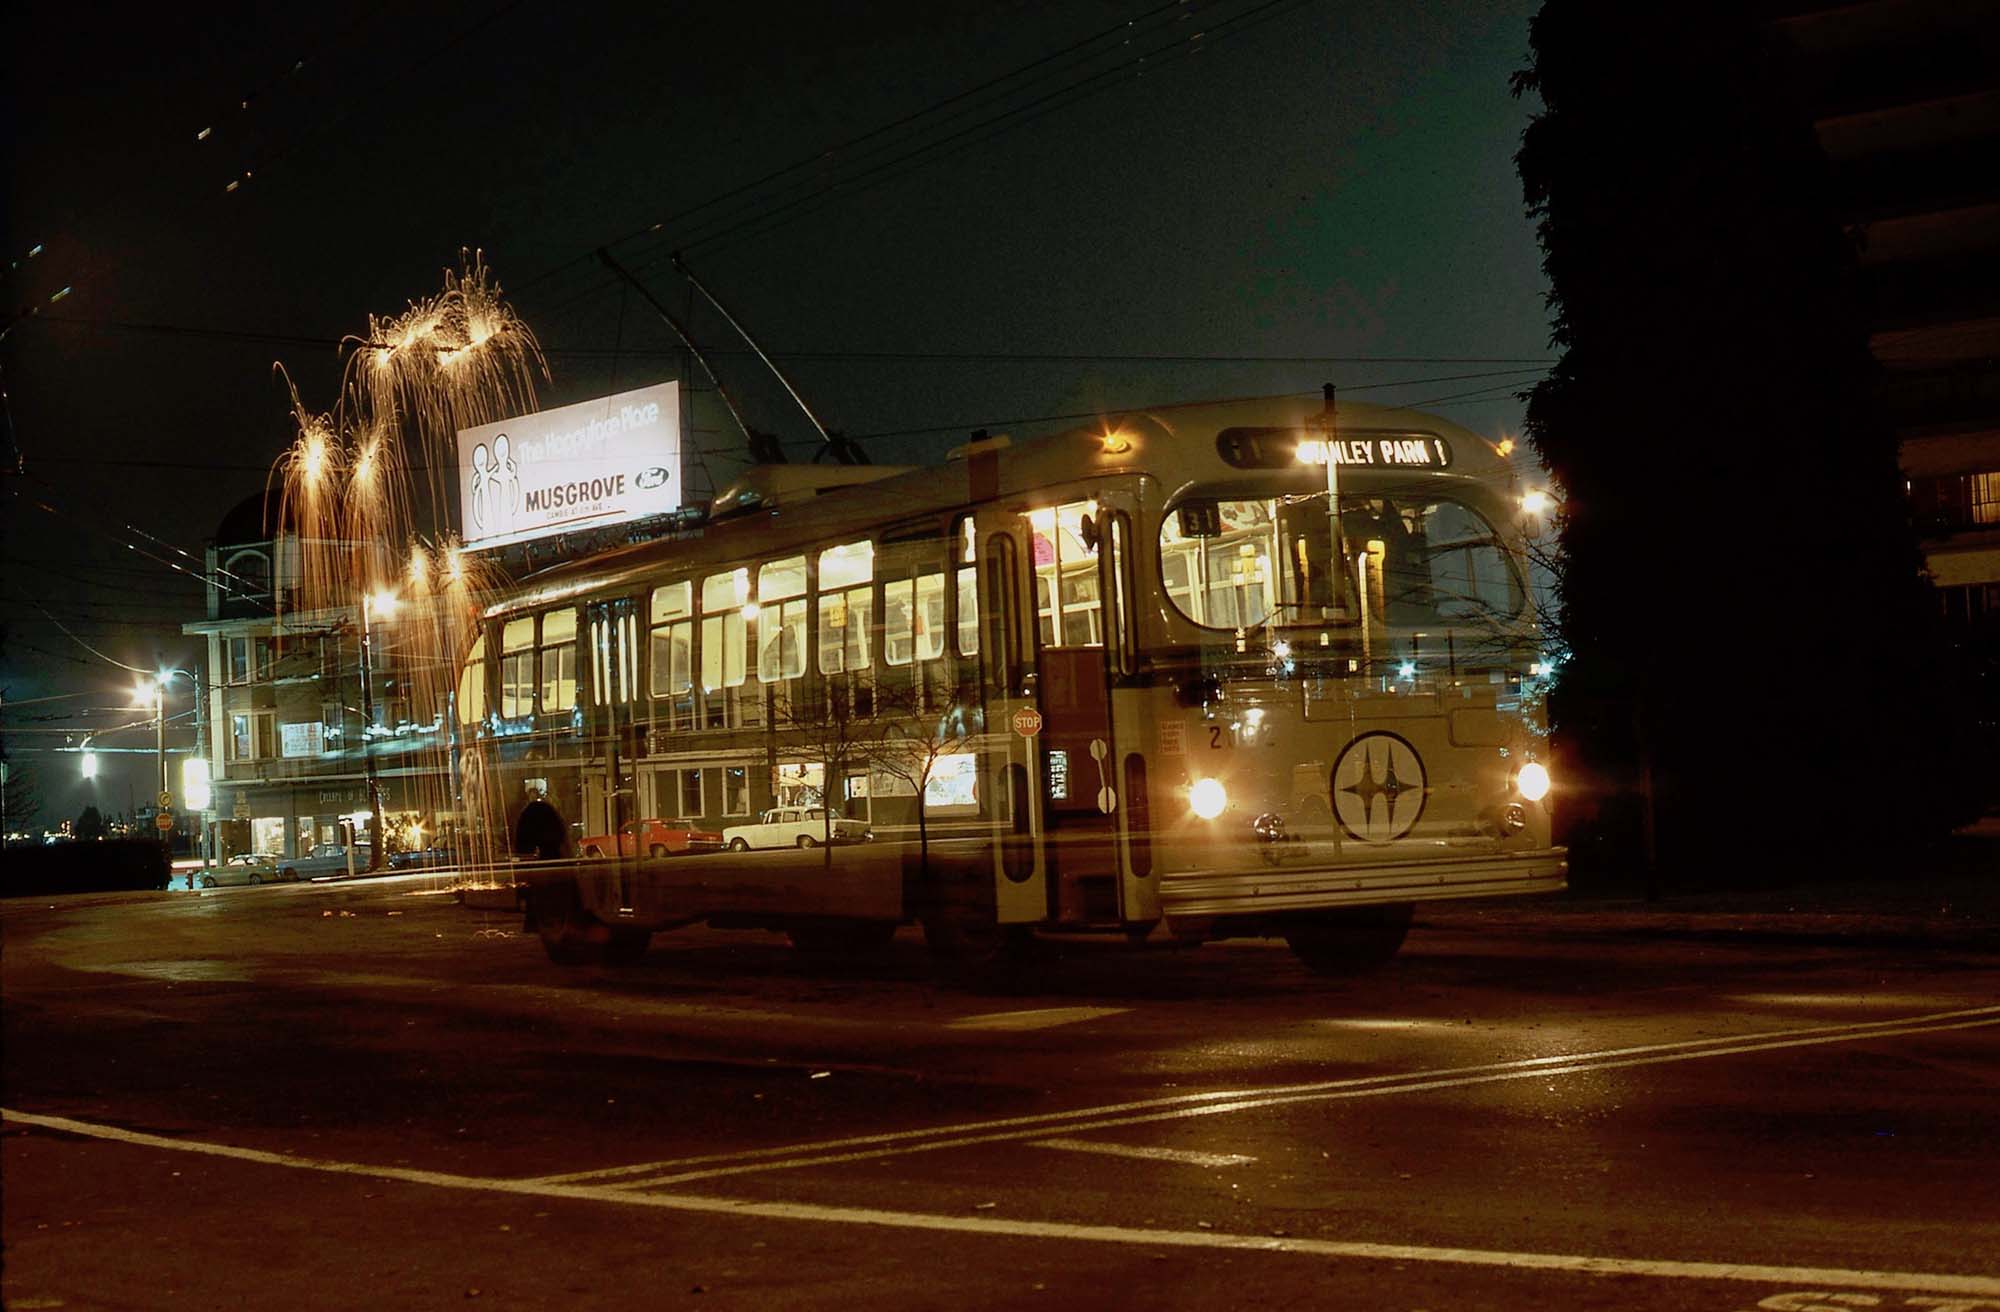 I took my camera and tripod to work one night in 1974 as a Vancouver trolley bus driver. This is a photo at the old (Chilco Street) Stanley Park Bus Loop with a 1948 Brill trolleybus. 

In the background, and through the bus, you can see the Stuart Building, which was illegally demolished at 4 am a few years later. To obtain this shot, the camera was placed on the tripod, and the shutter was locked open. With all the bus lights turned off, the bus was originally parked at least a bus length further back. 

The reason for all the sparks is this was a passing wire in the loop that was rarely used, and so the metal curve segments on the trolley wires oxidise, and if you power through them you get some great sparks. I pulled the bus forward, created the sparks, and parked it, turned on all the bus lights, and continued the exposure long enough to capture the image of the bus. But not for too long, as I wanted the Stuart Building to show through. So it was a single exposure, although it looks like a "double exposure". I used a Konica Autoreflex 2 camera with Kodachrome film. The loop had incandescent street lights.
